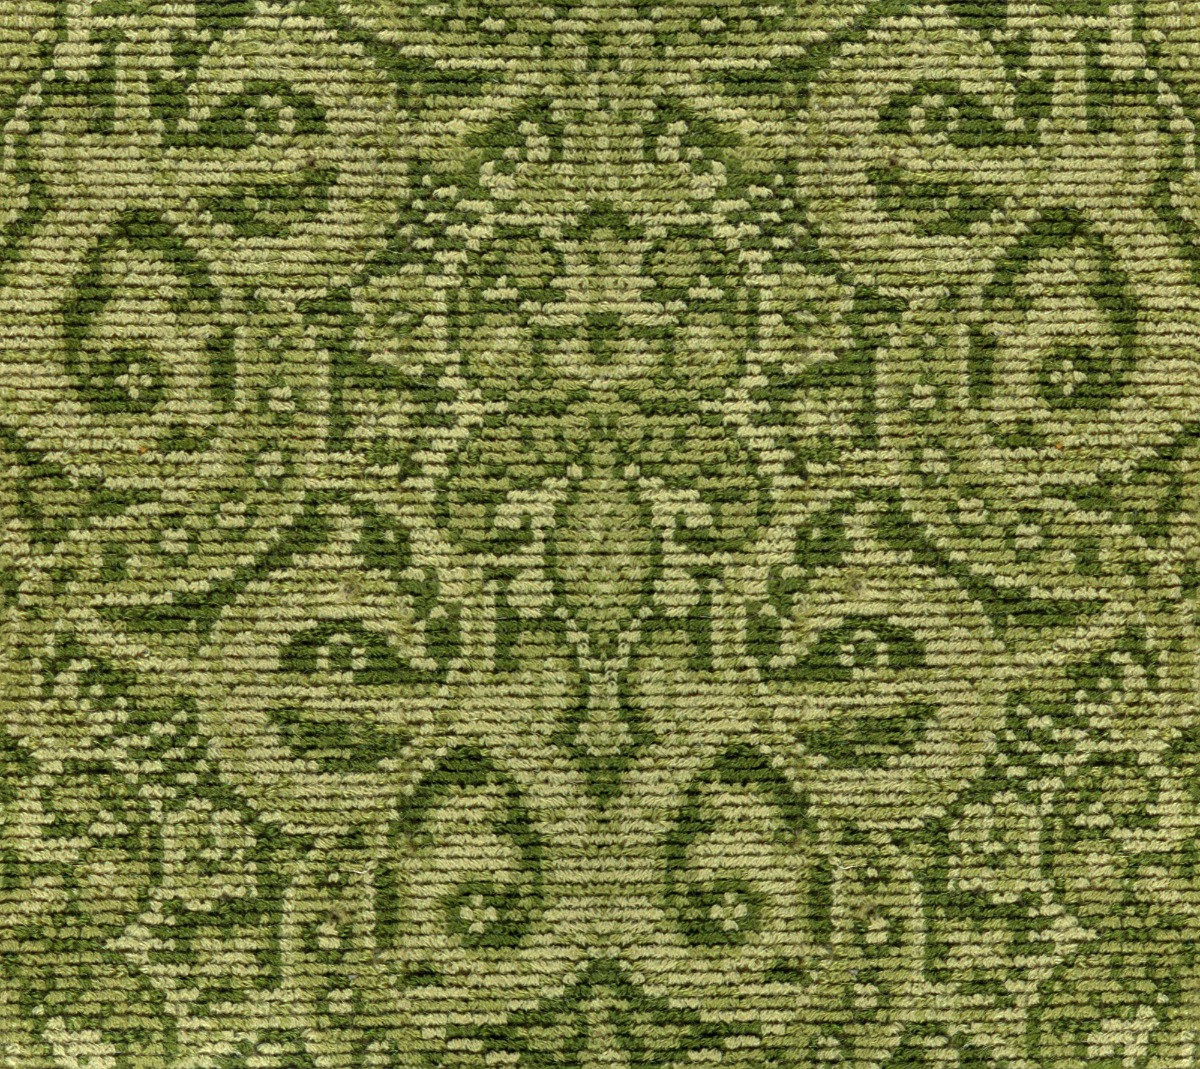 A seamless carpet texture with brussels carpet units arranged in a None pattern